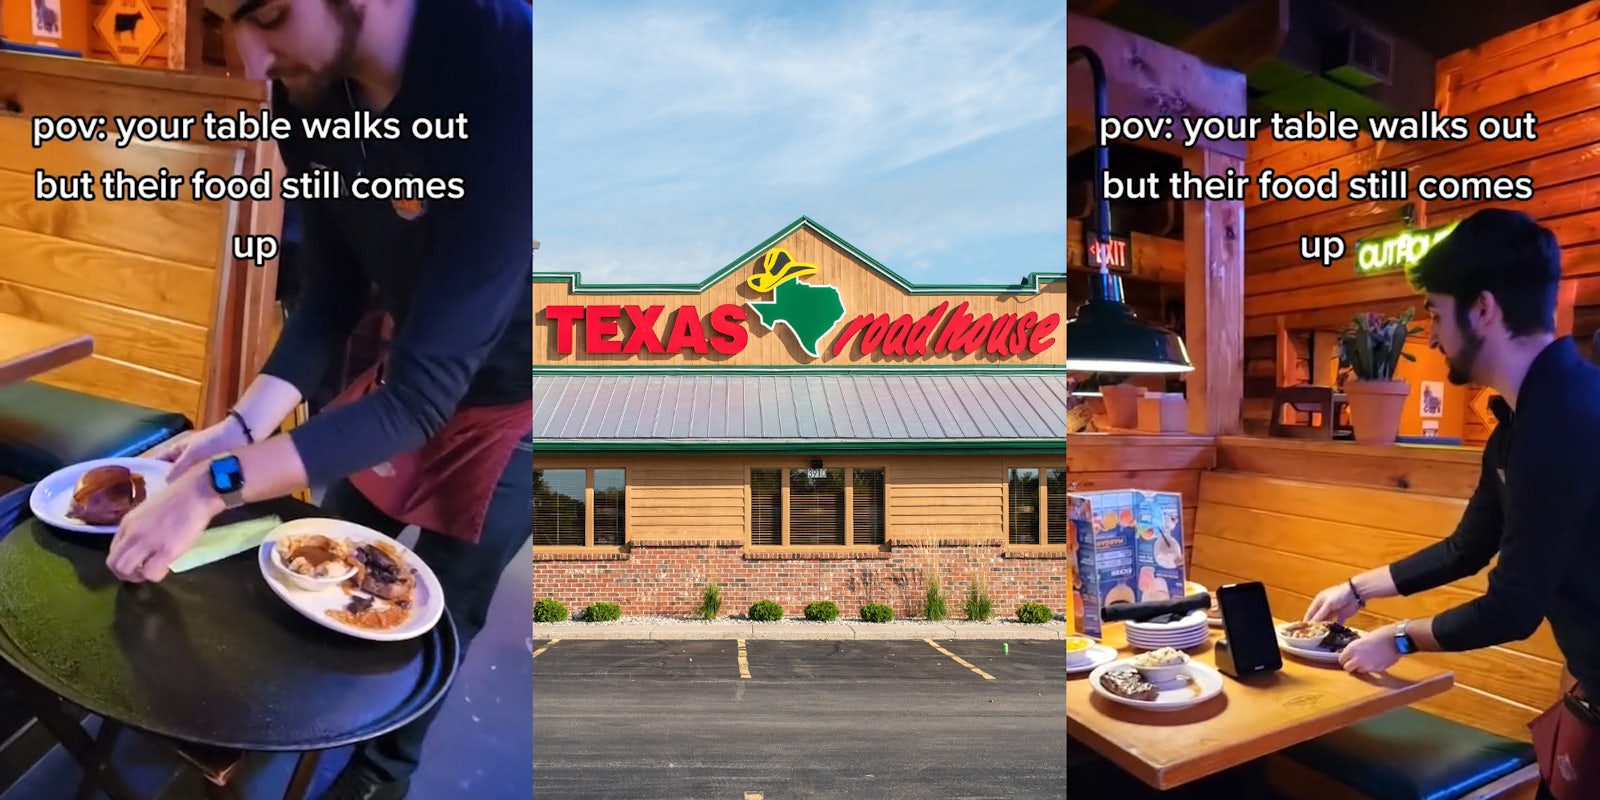 server grabbing plate of food next to table caption 'pov: your table walks out but their food still comes up' (l) Texas Roadhouse building with sign and parking lot (c) server placing plate of food on table caption 'pov: your table walks out but their food still comes up' (r)